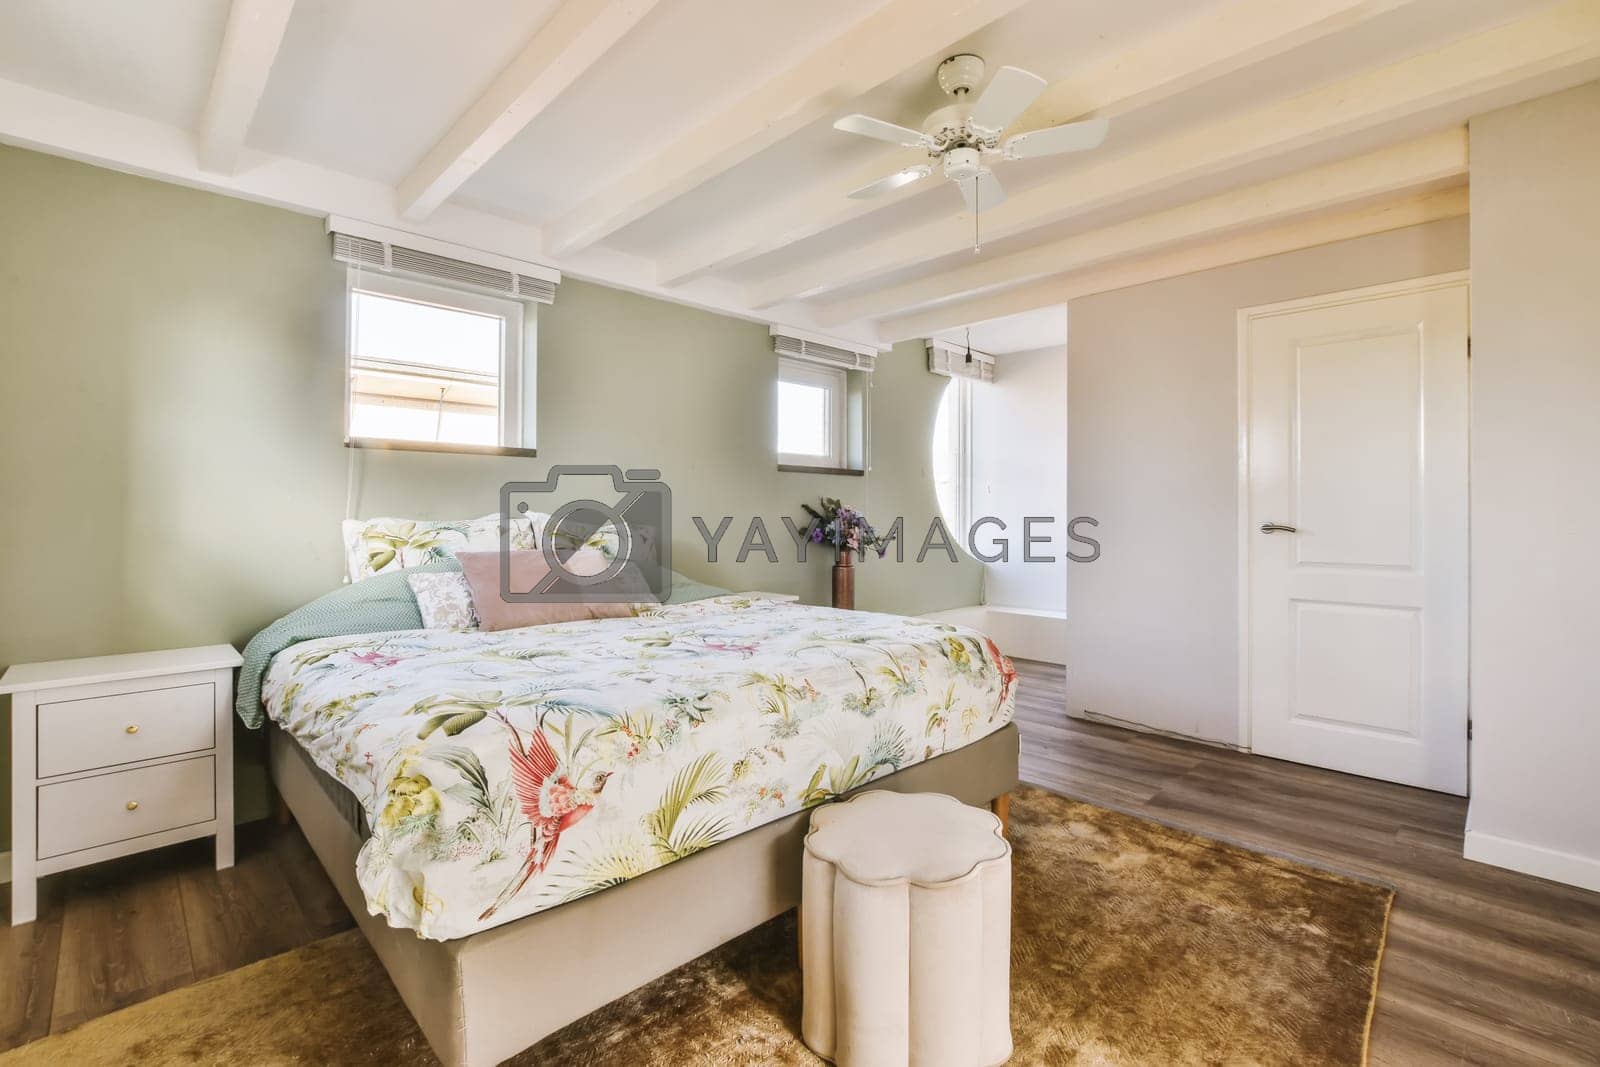 Royalty free image of a bedroom with a bed and a ceiling fan by casamedia